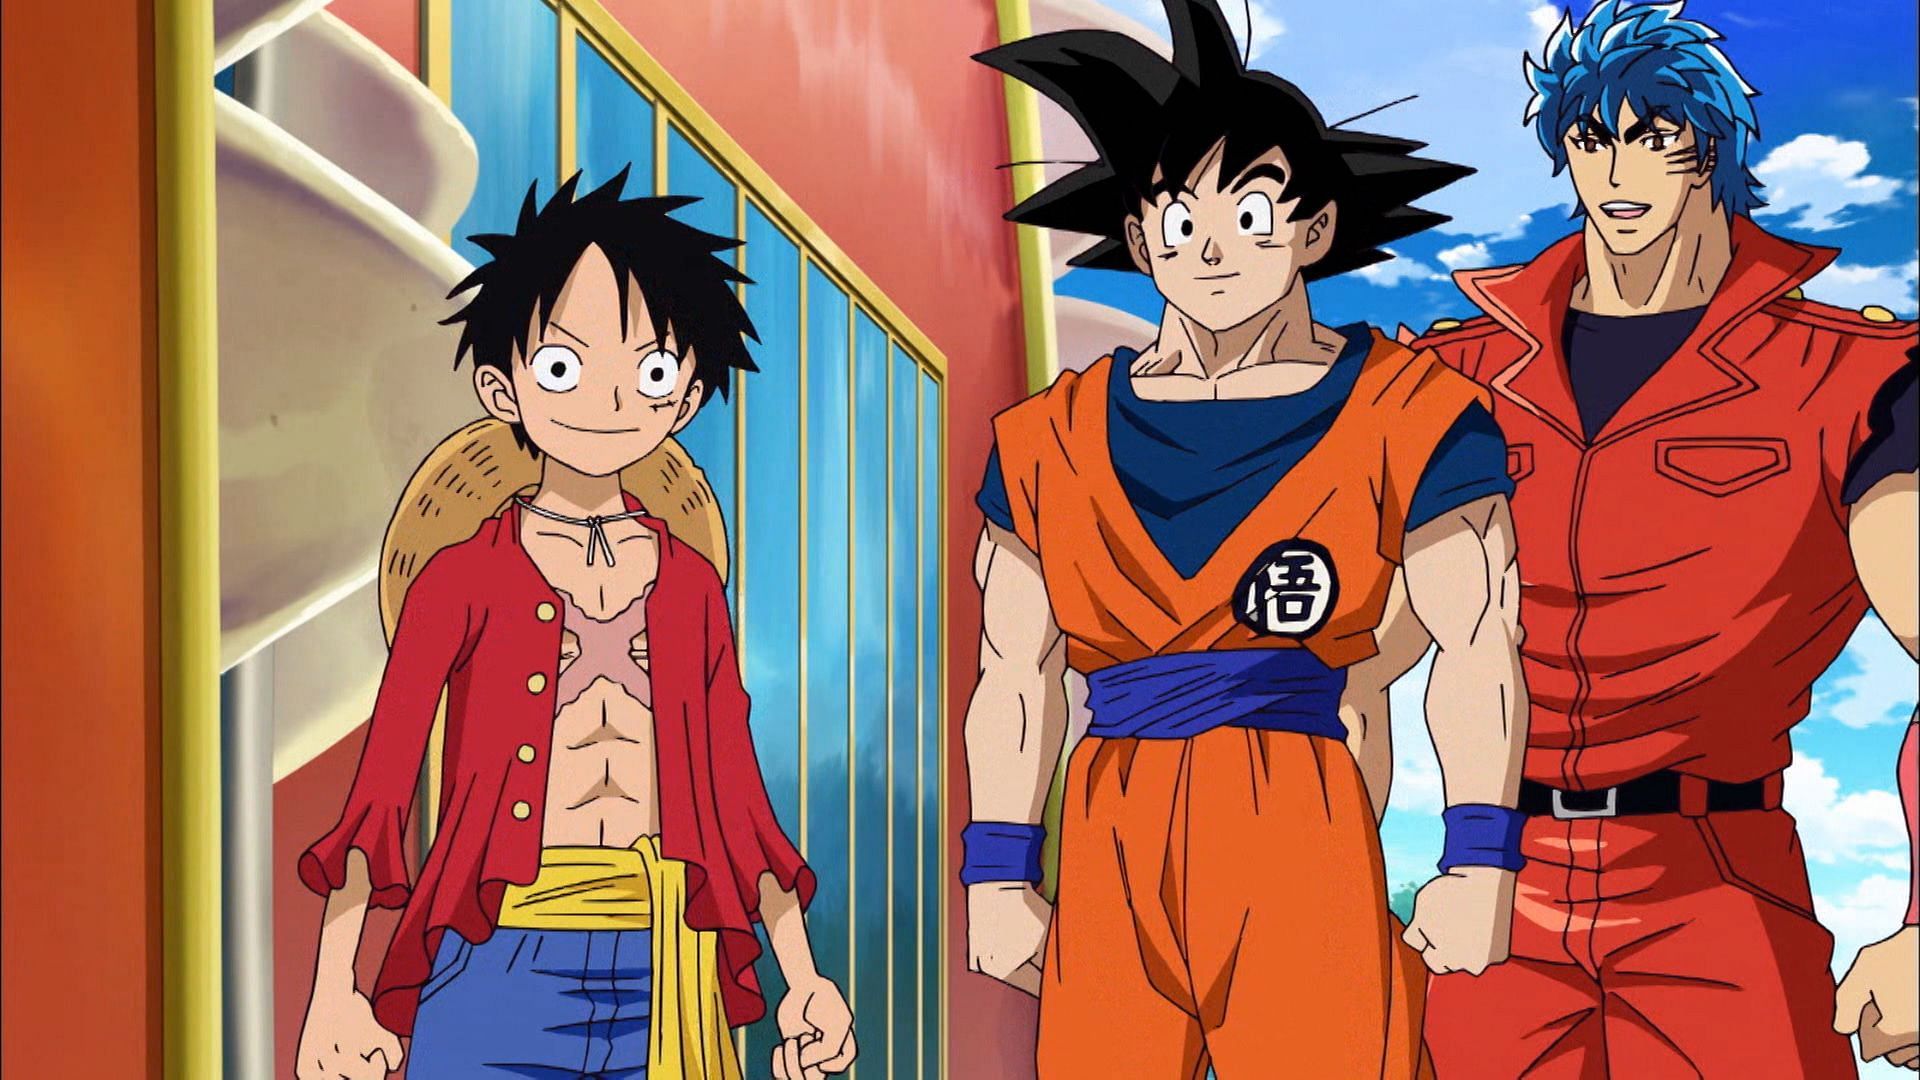 The Dragon Ball Z x One Piece crossover looked 